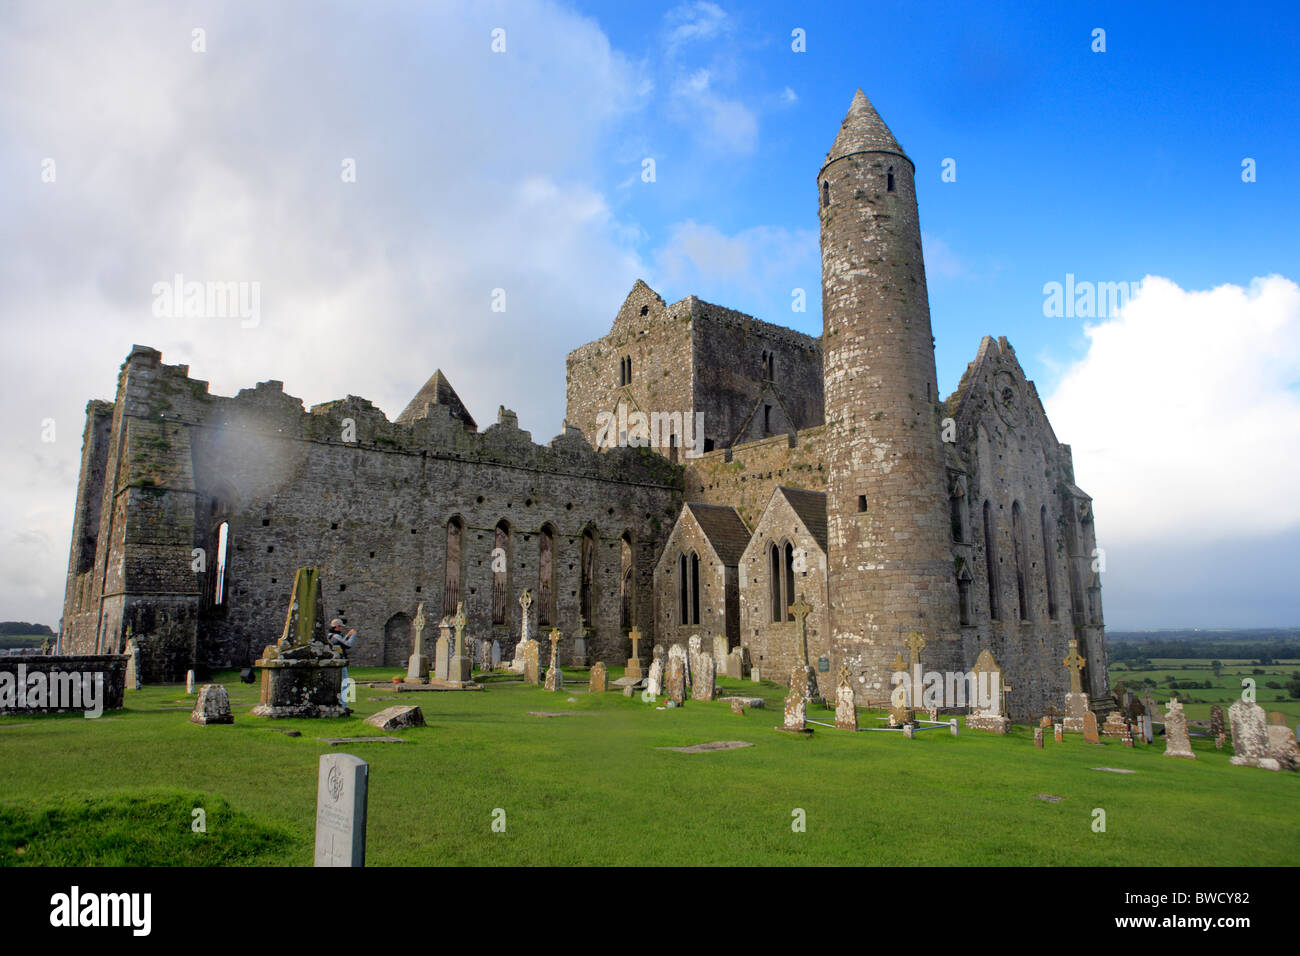 Cathedral (1235-1270) and Round tower (c. 1100), Tipperary, Rock of Cashel, Ireland Stock Photo